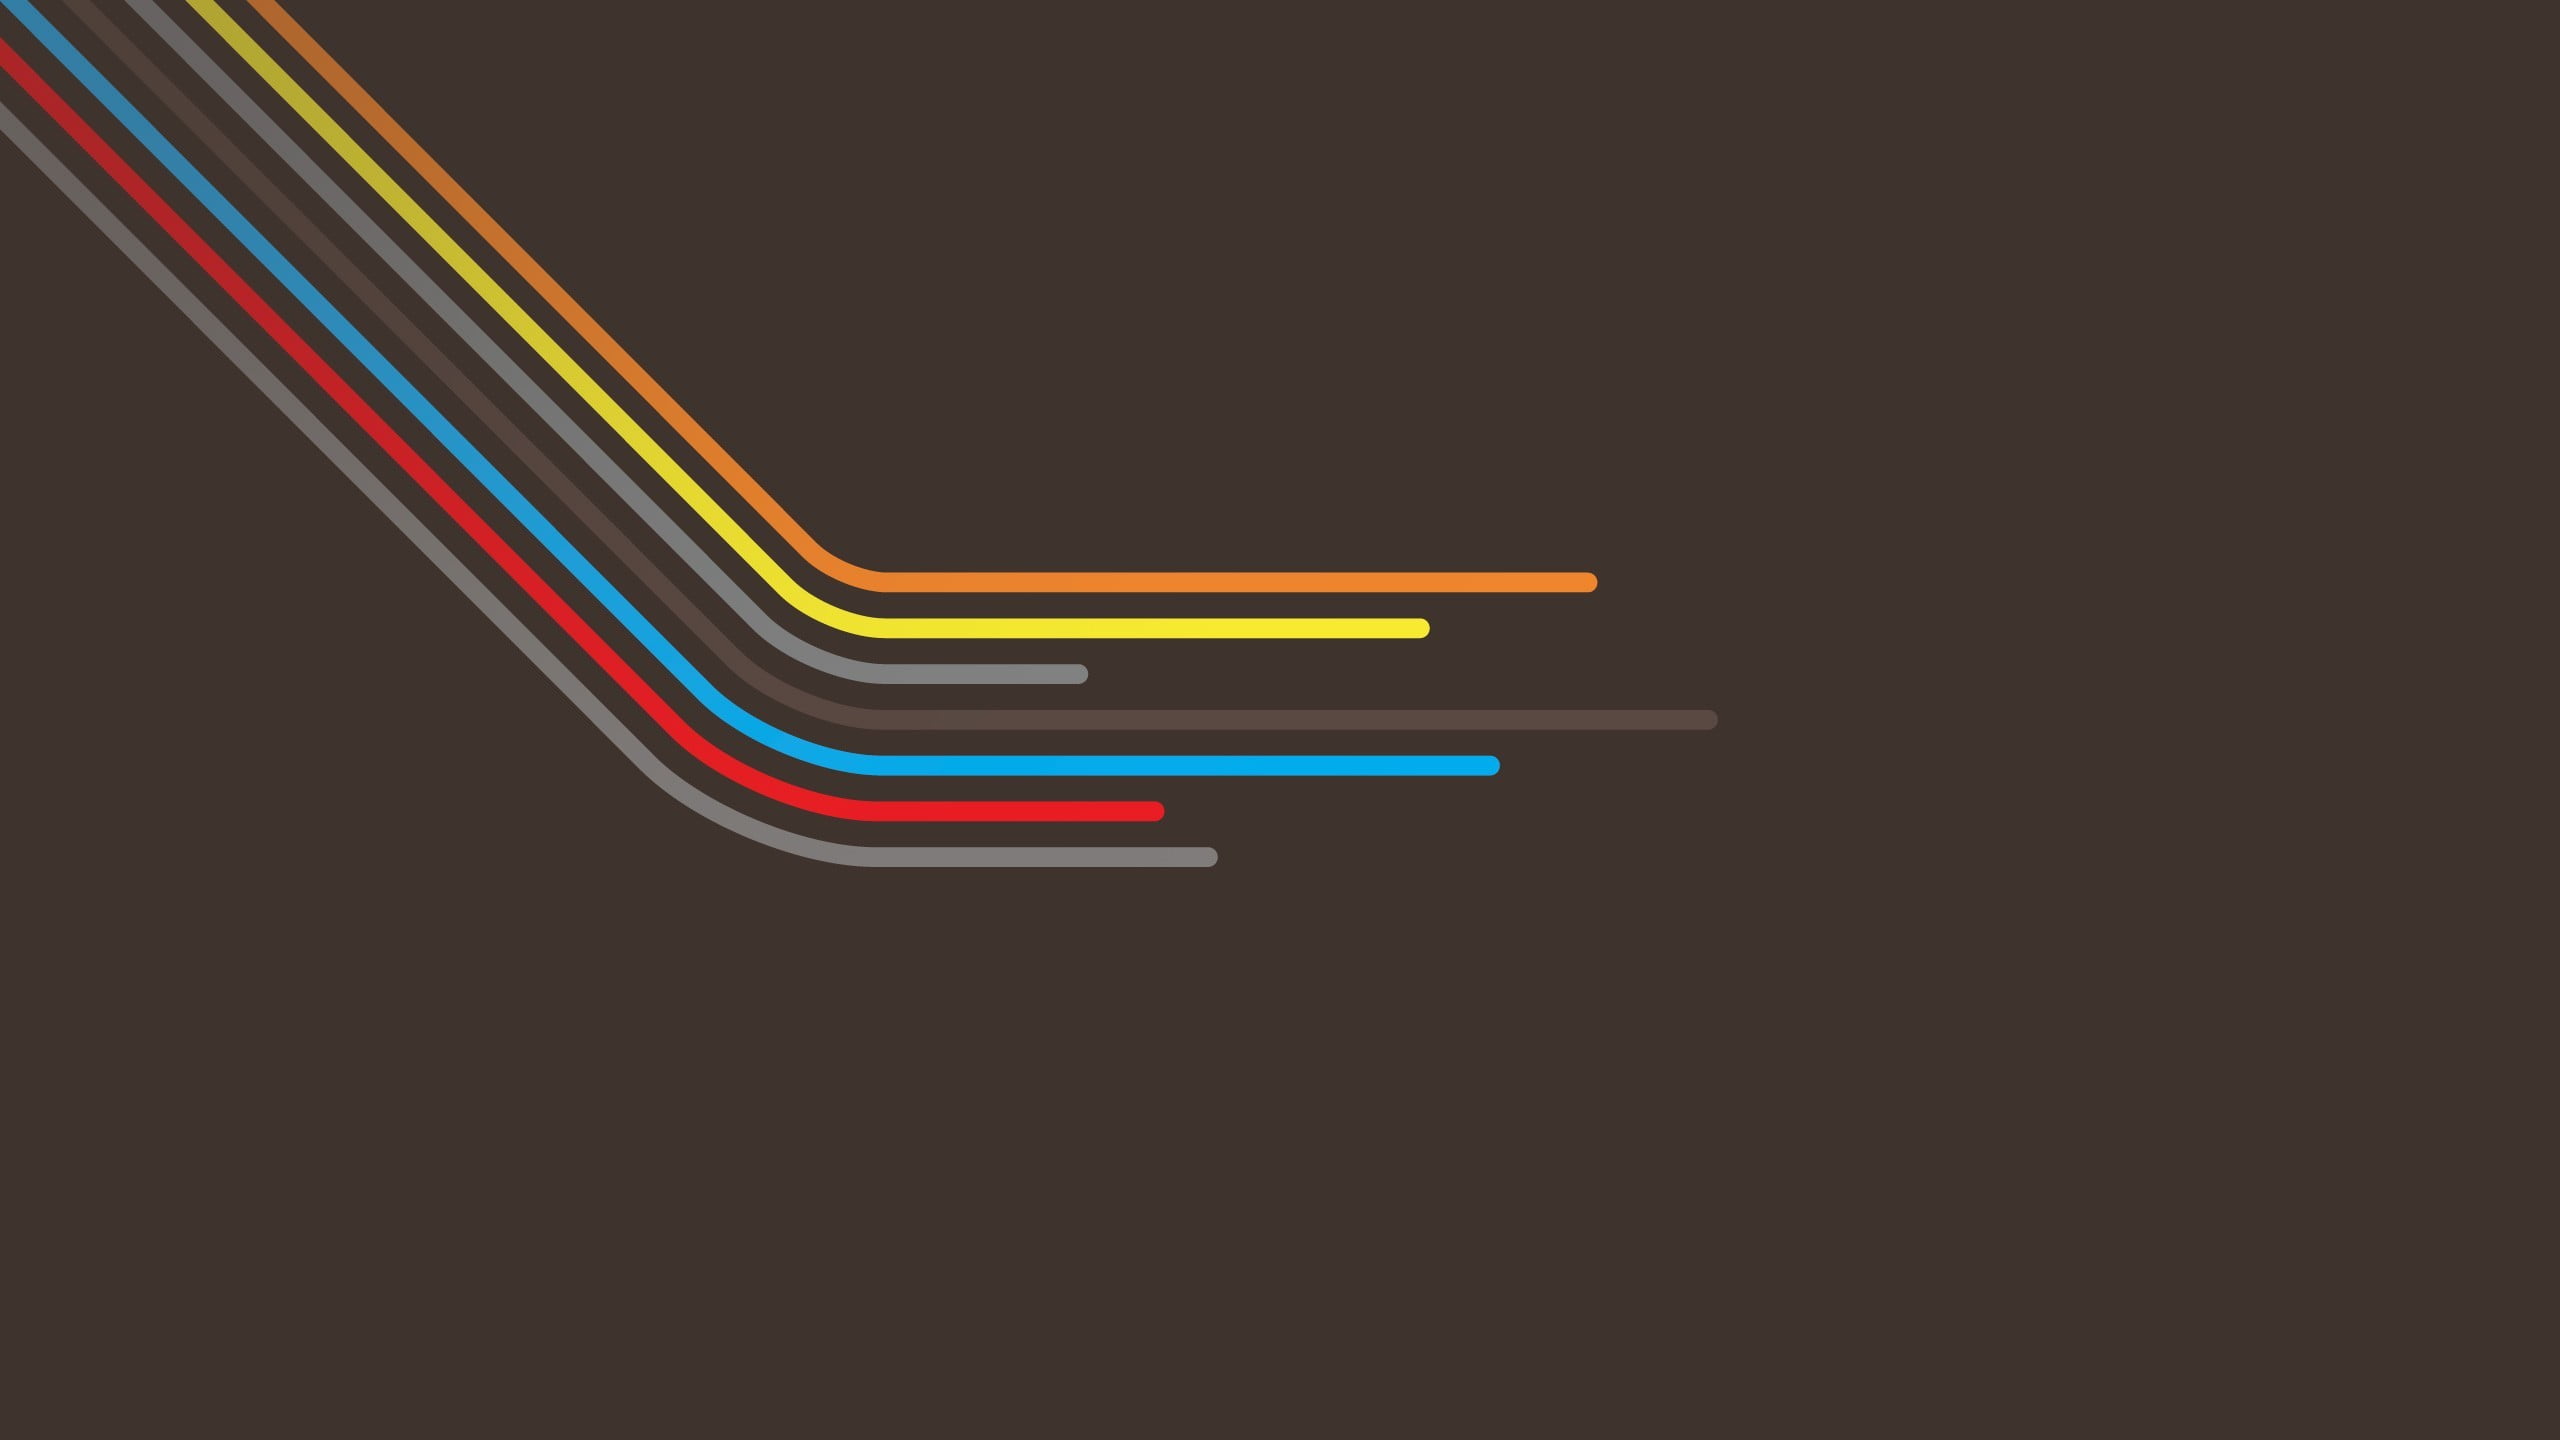 assorted-color lines illustration, abstract, simple, minimalism, lines